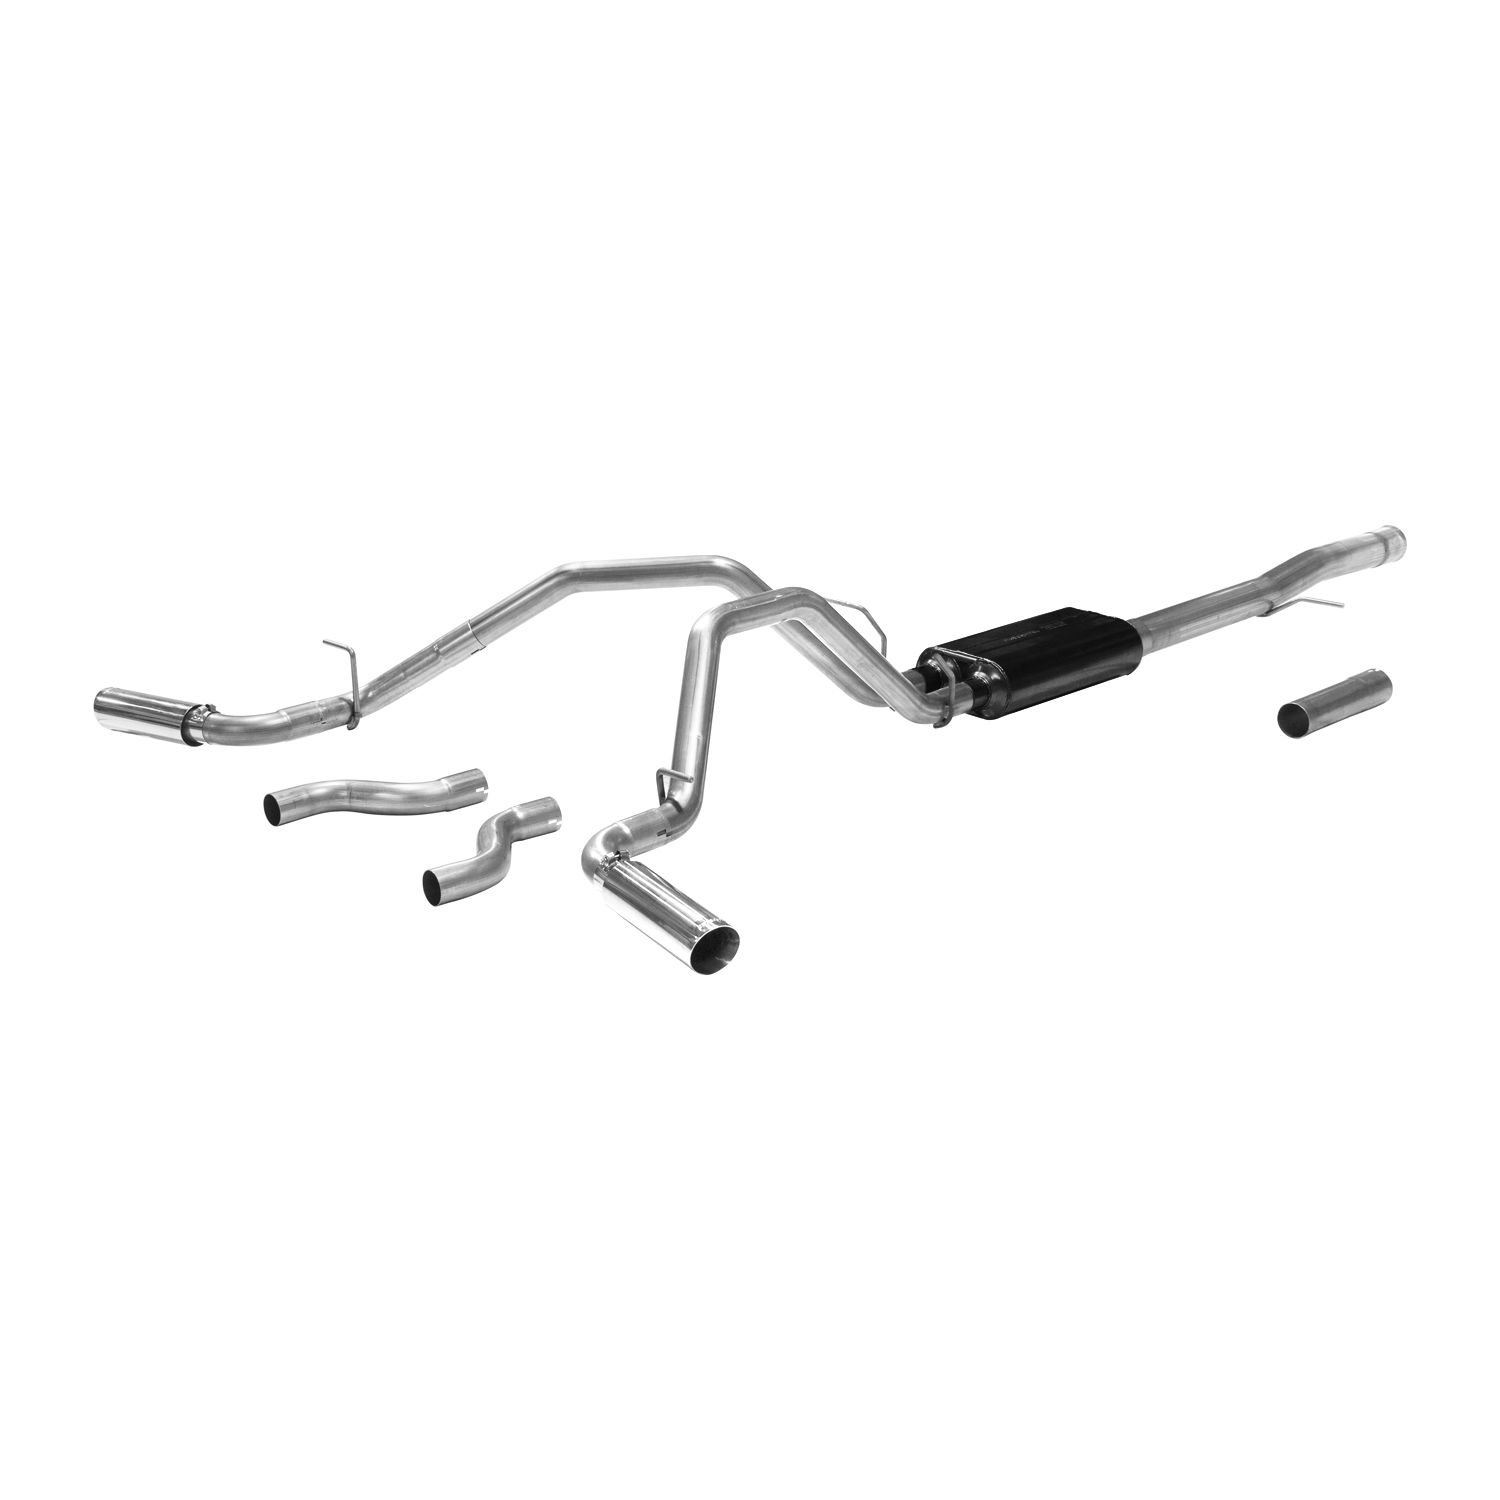 2014-2018 Chevrolet Silverado 1500 High Country 6.2L Crew Cab Flowmaster American Thunder Cat-Back Exhaust 69.3 inch Bed